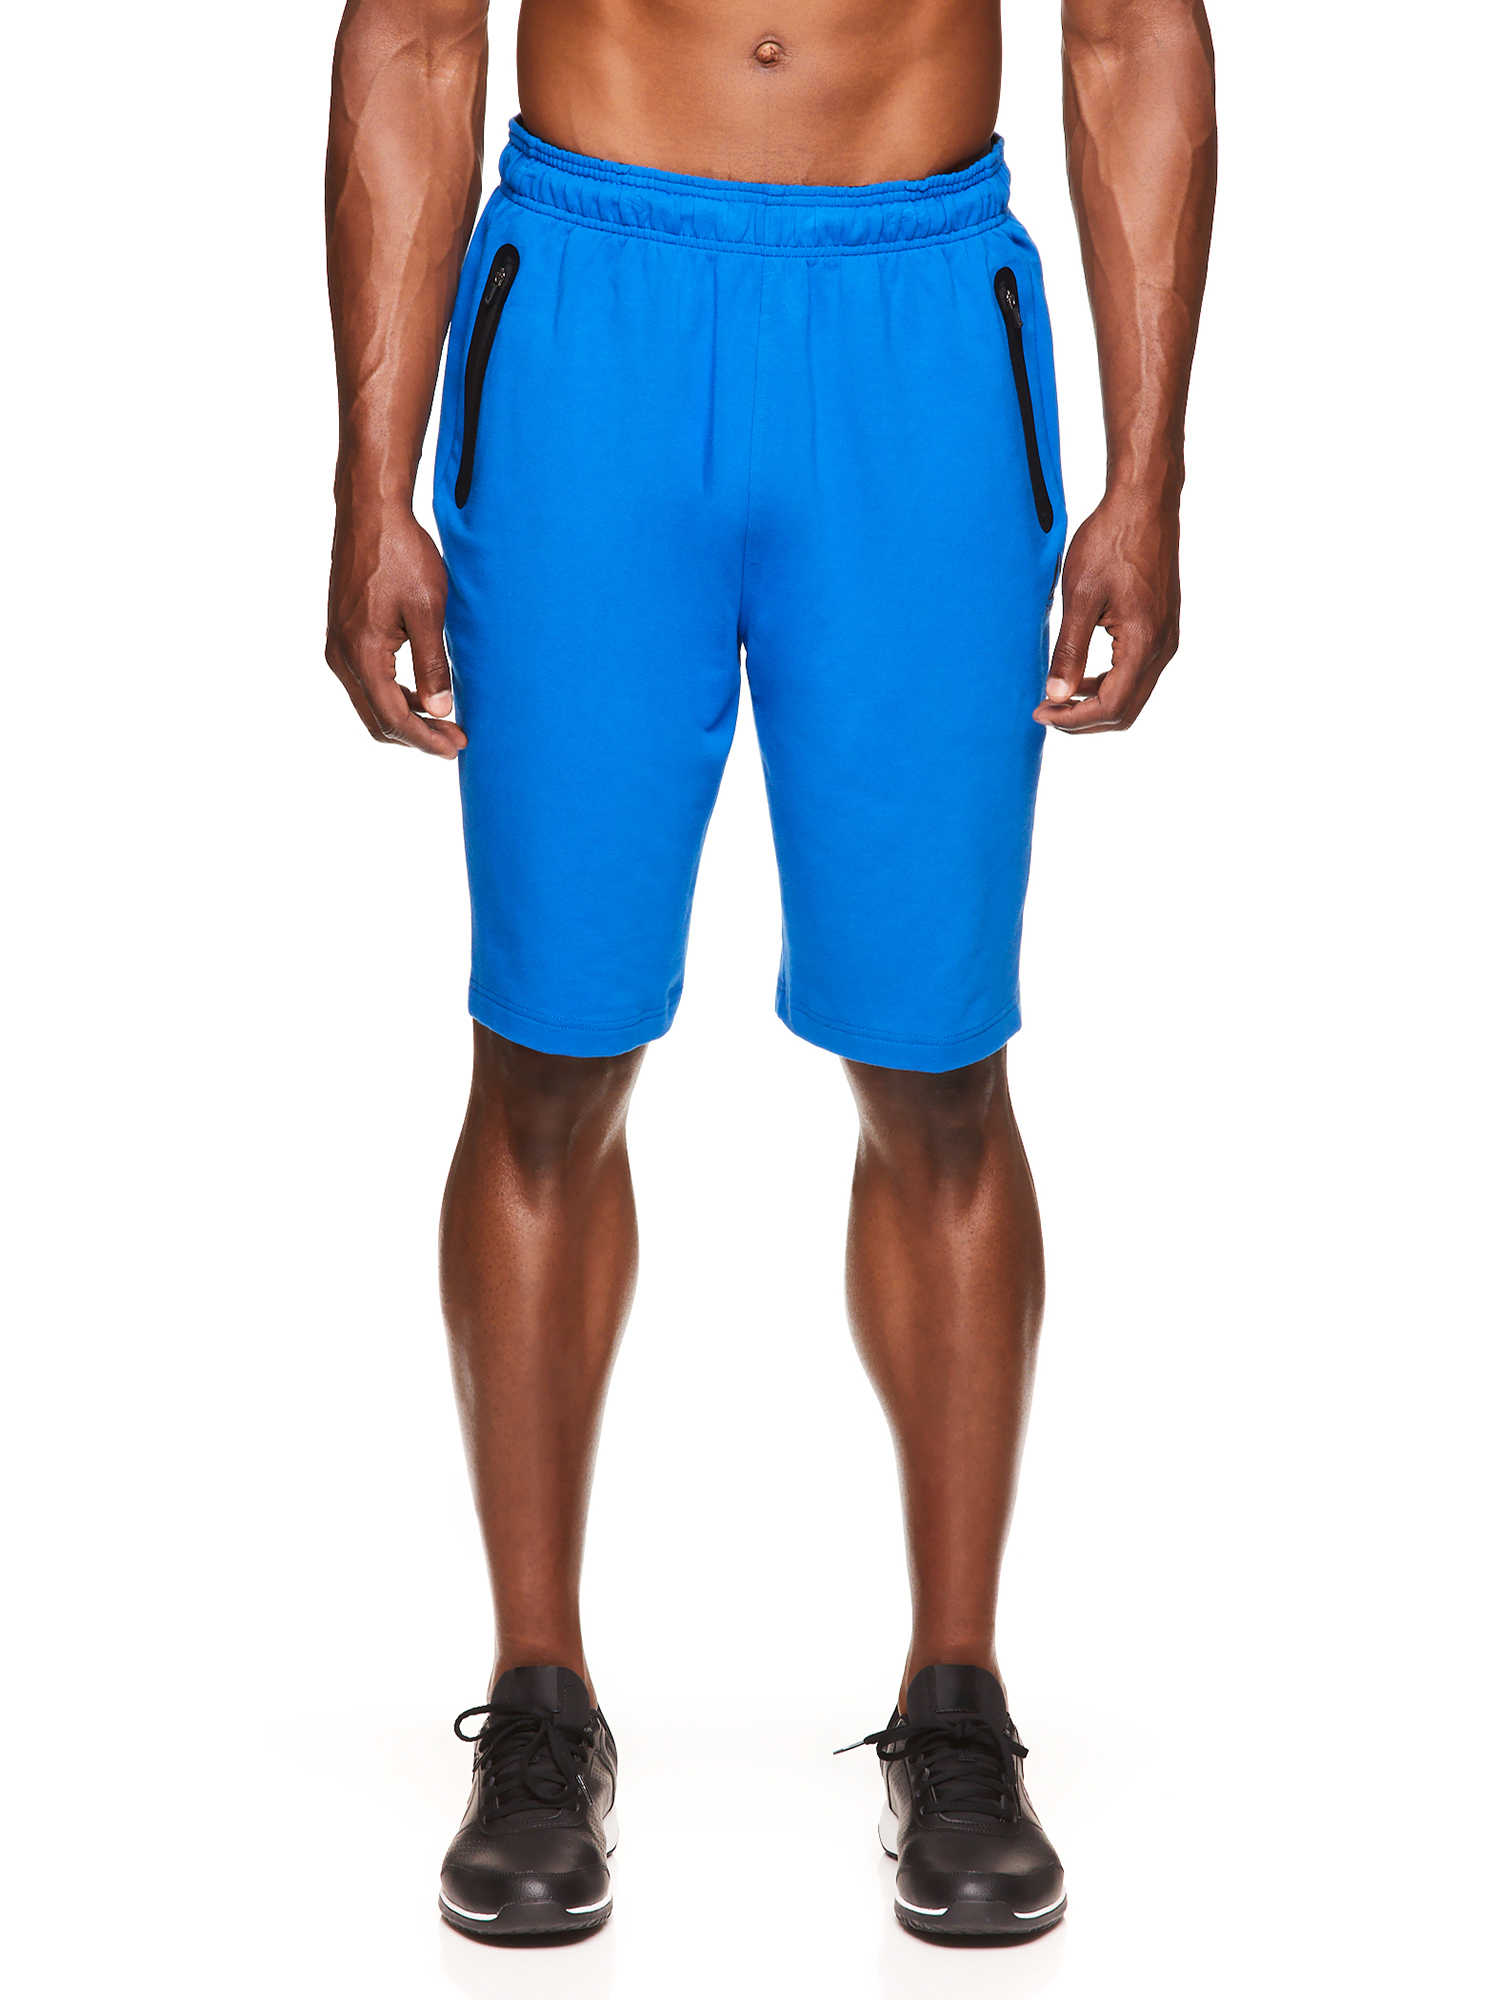 Reebok Men's and Big Men's Active Tech Terry Shorts, 10" Inseam Basketball Shorts, up to Size 3XL - image 1 of 4